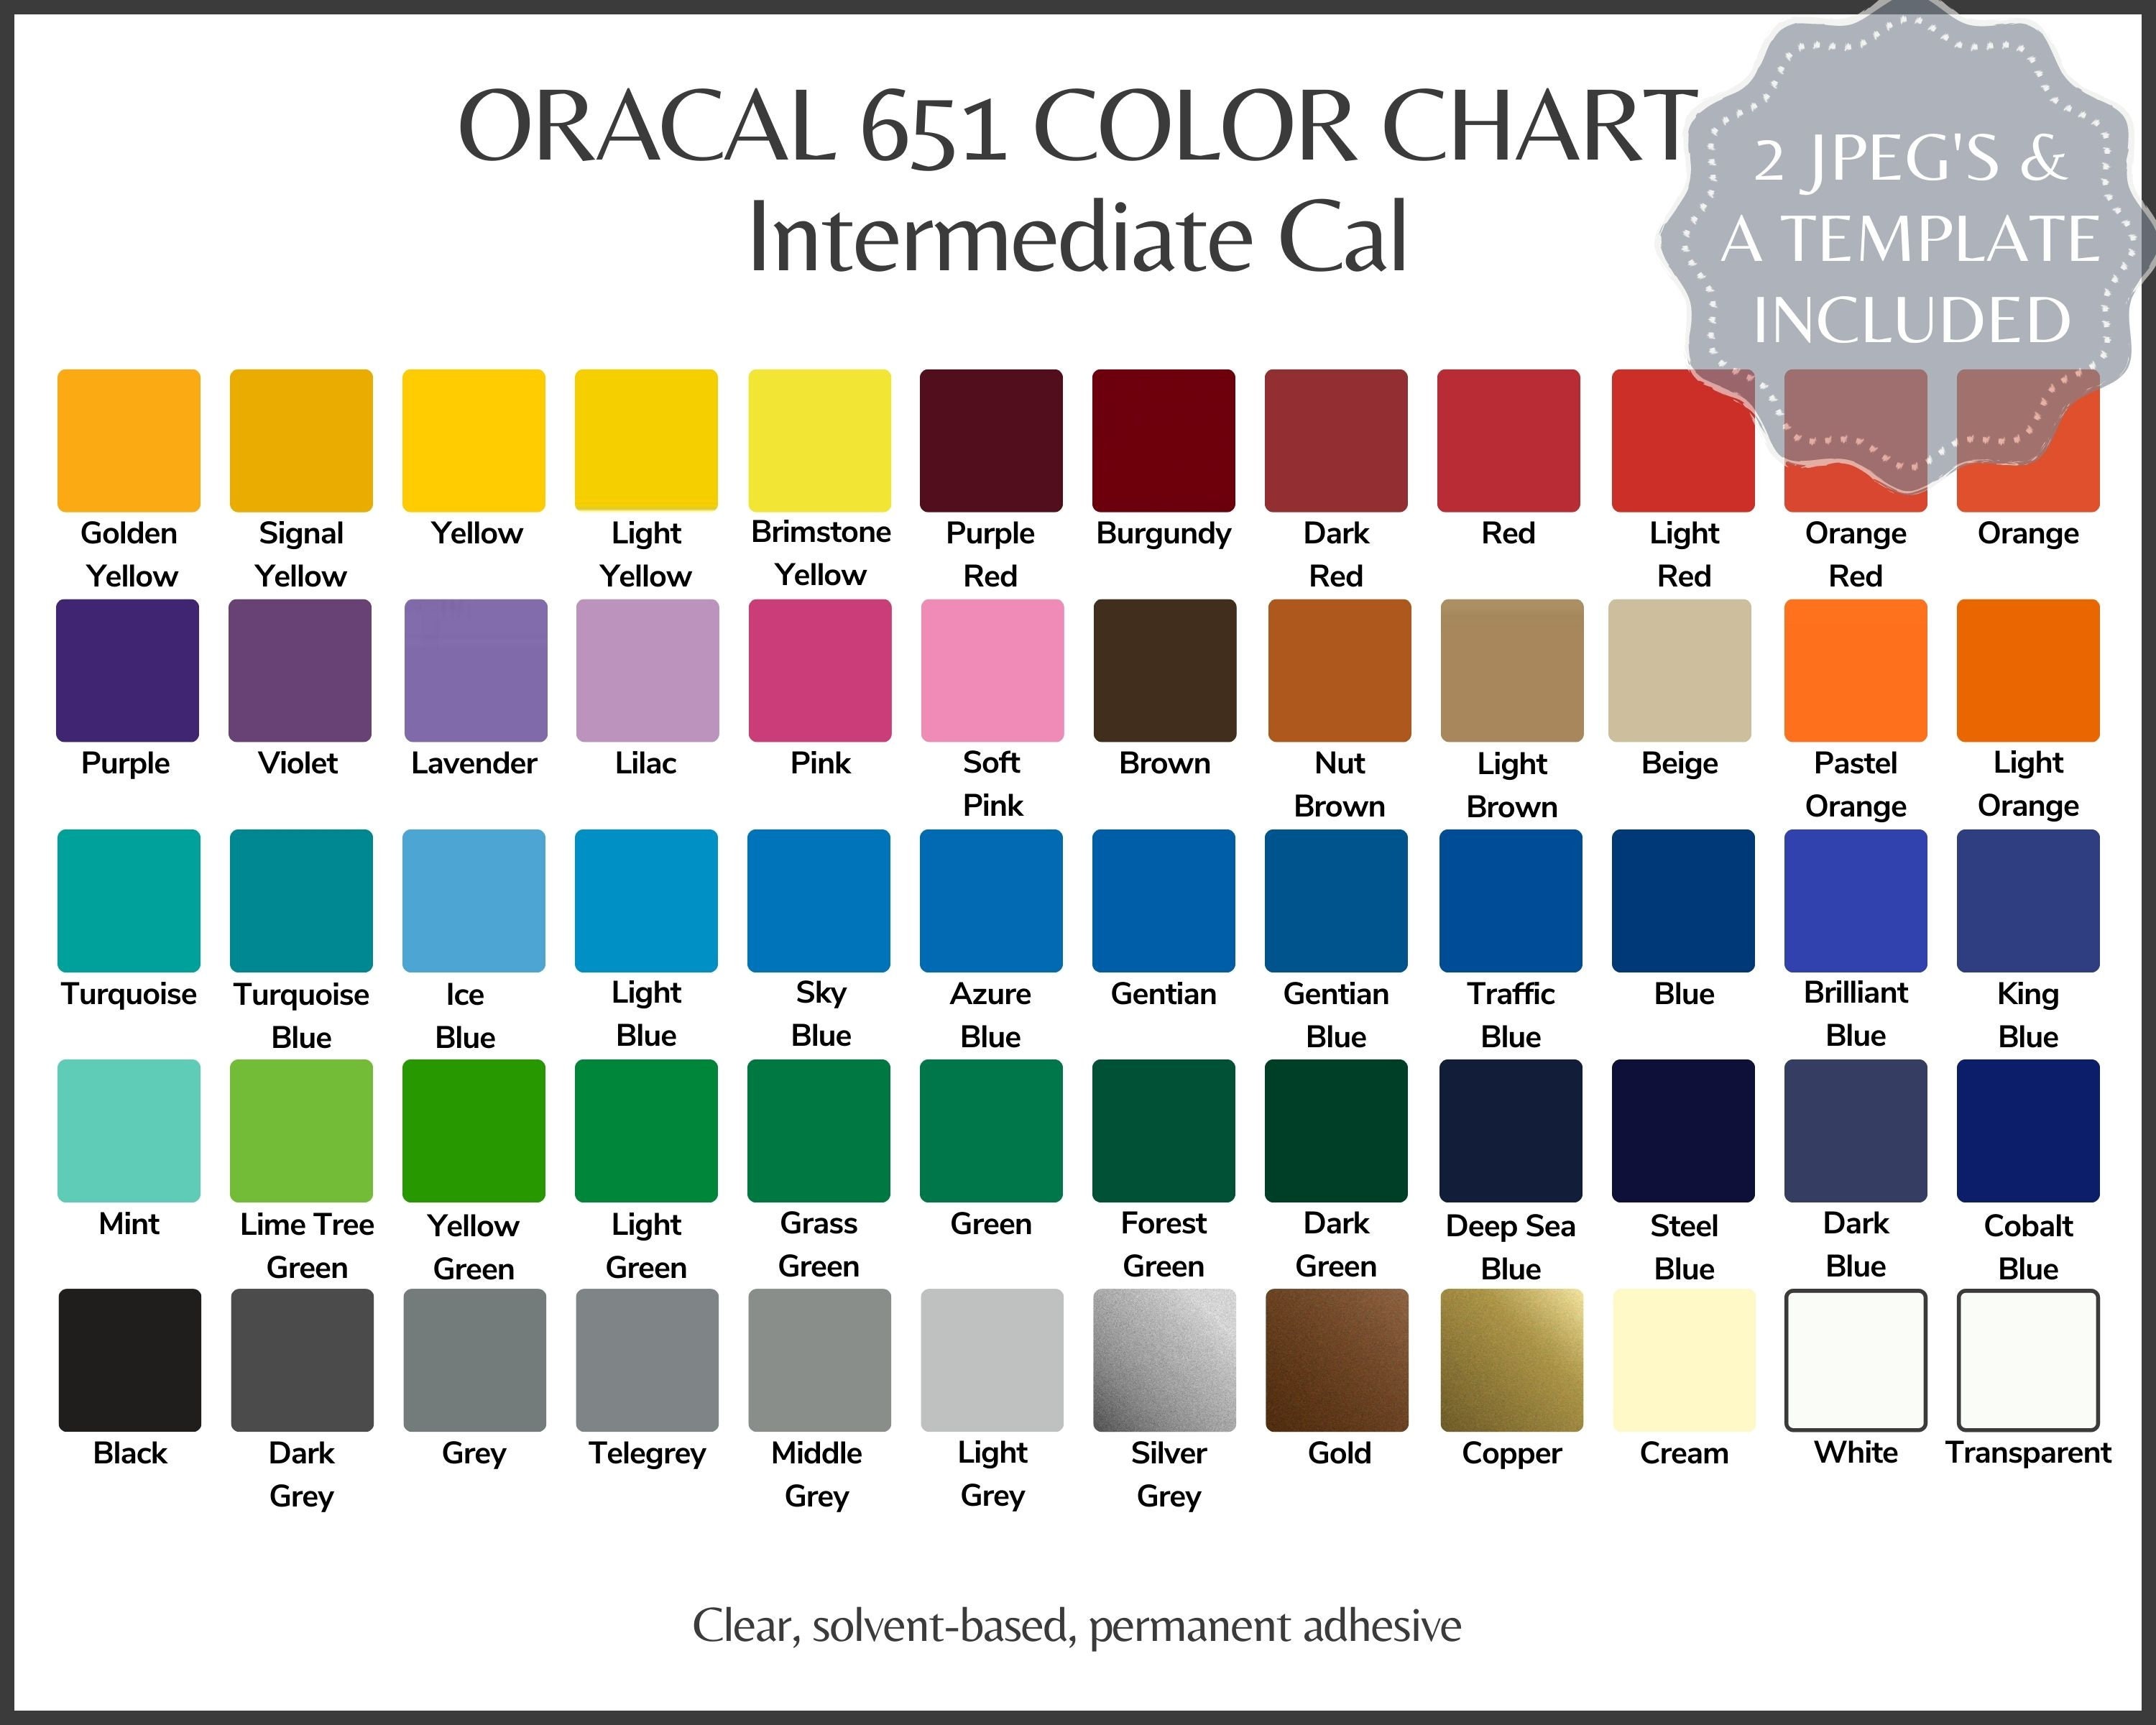 63 Colors Oracal 651 Permanent Outdoor Adhesive Vinyl Sampler Pack